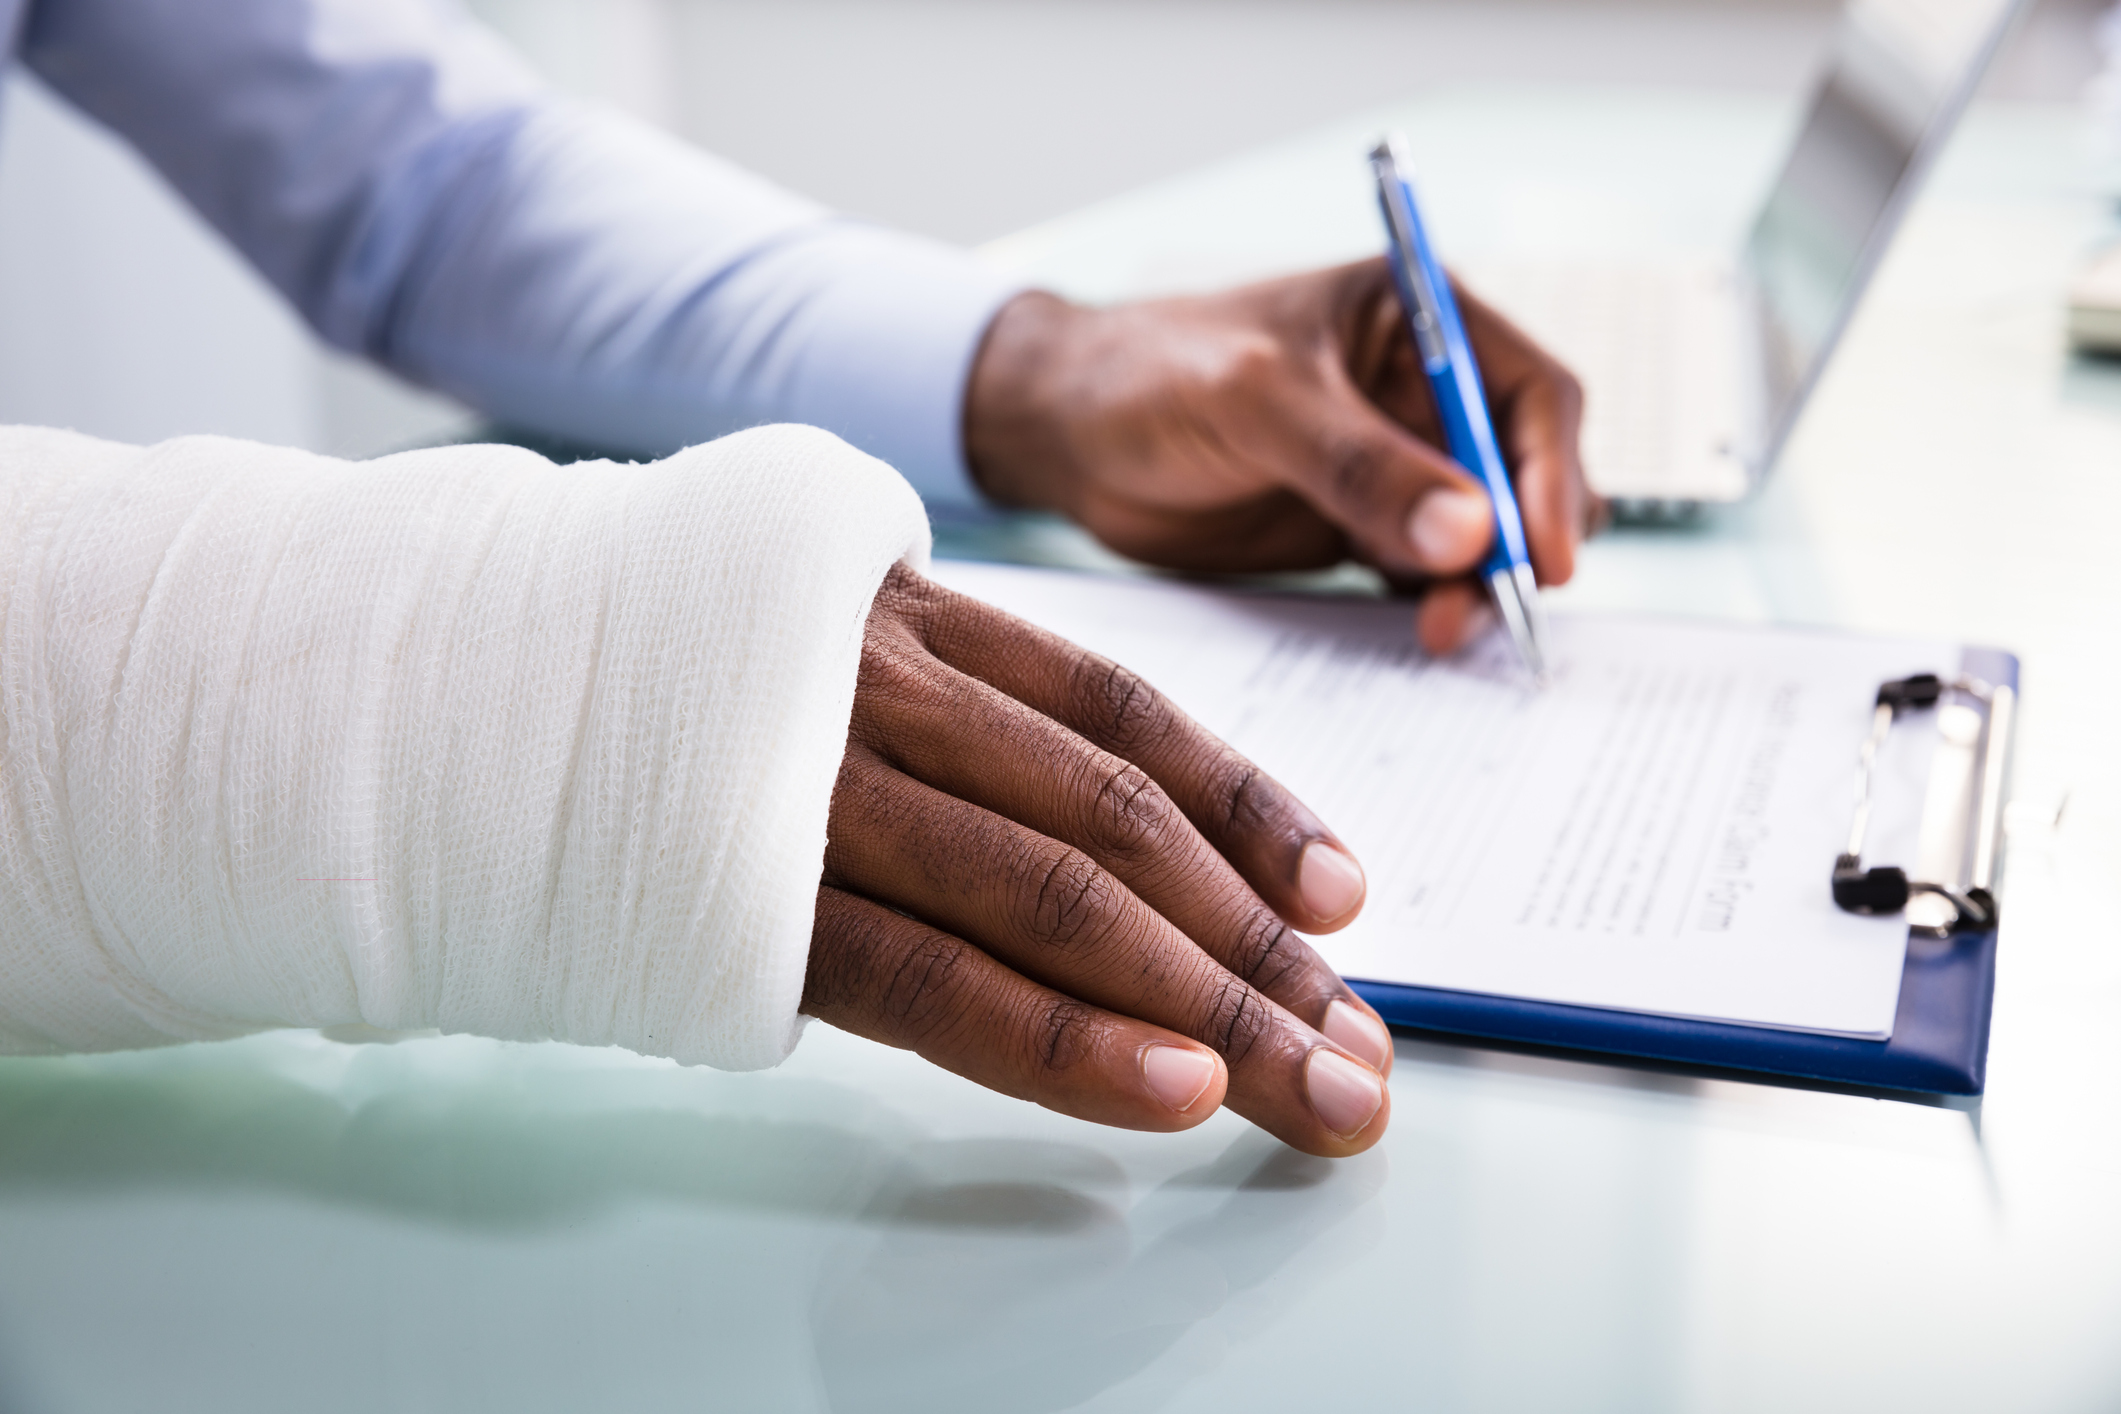 Filing a personal injusry claim